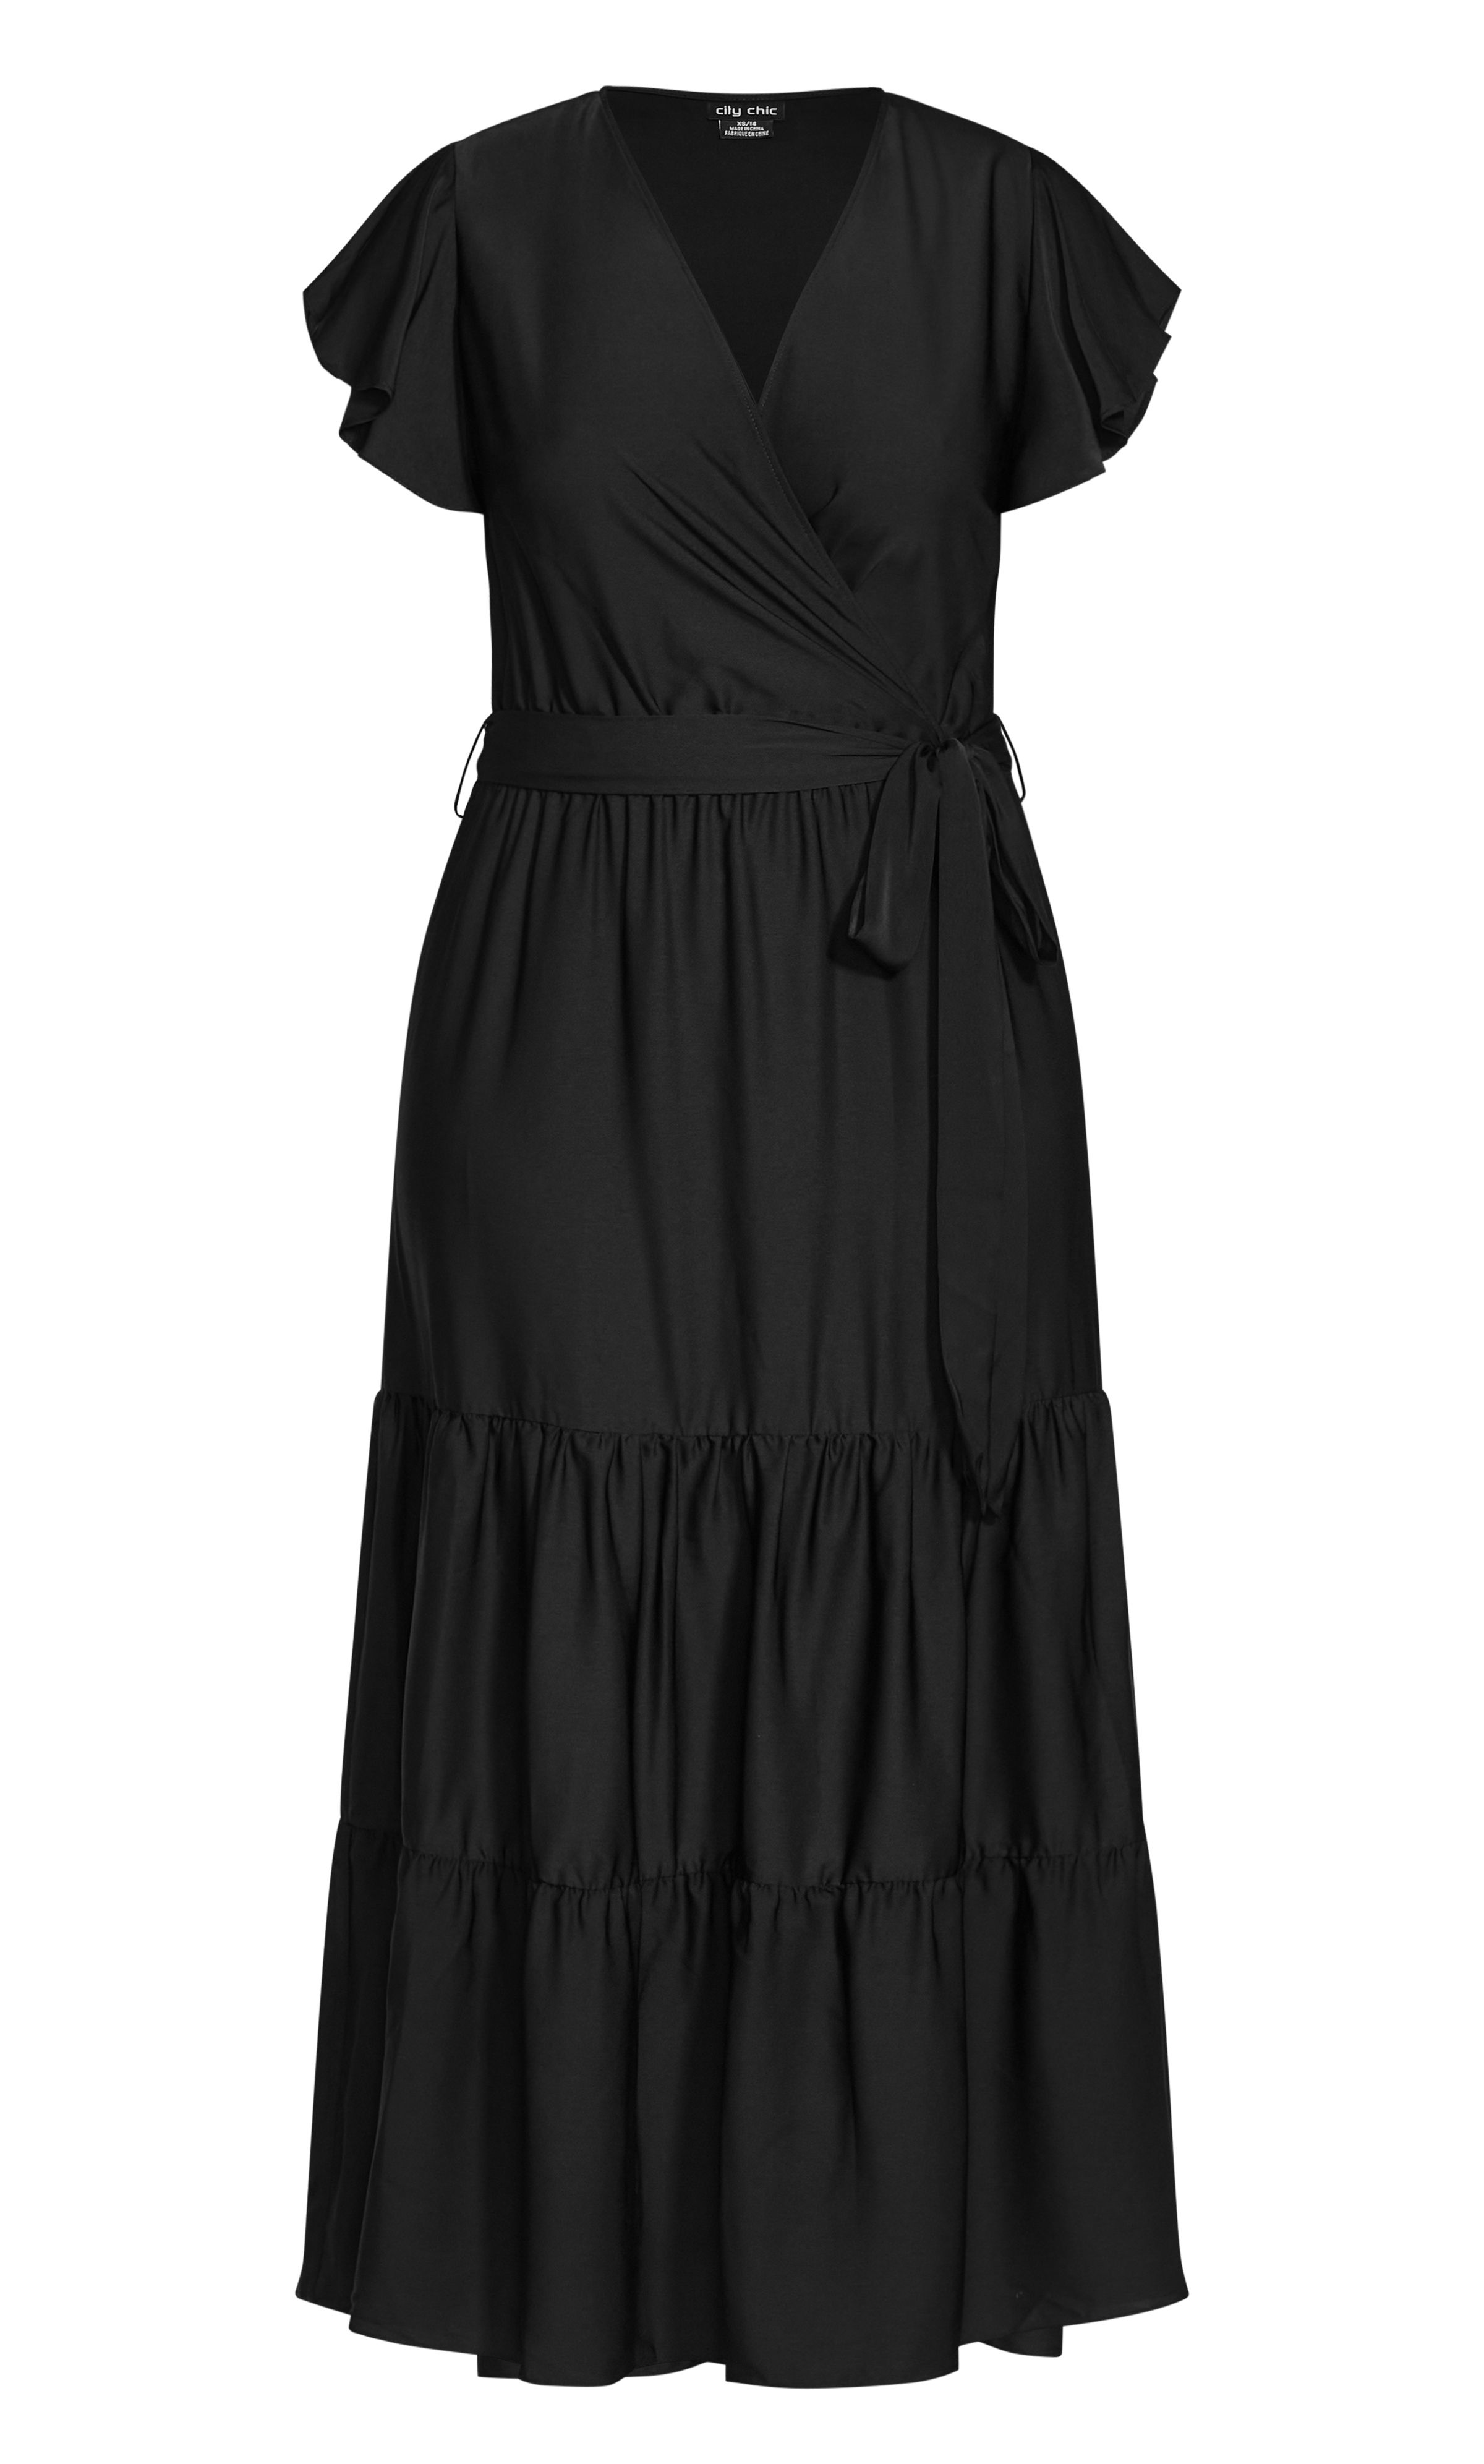 Float into the new season with the Flutter Away Maxi Dress, boasting a feminine silhouette and ruffle tiered skirt. Finished in a flattering faux wrap neckline and elegant tie waist, this draping maxi dress is one graceful ensemble. Key Features Include: - V-neckline - Frilled short sleeves - Elasticated waistband - Removable self-tie waist belt - Faux wrap style - Tiered skirt - Pullover style - Unlined - Maxi length